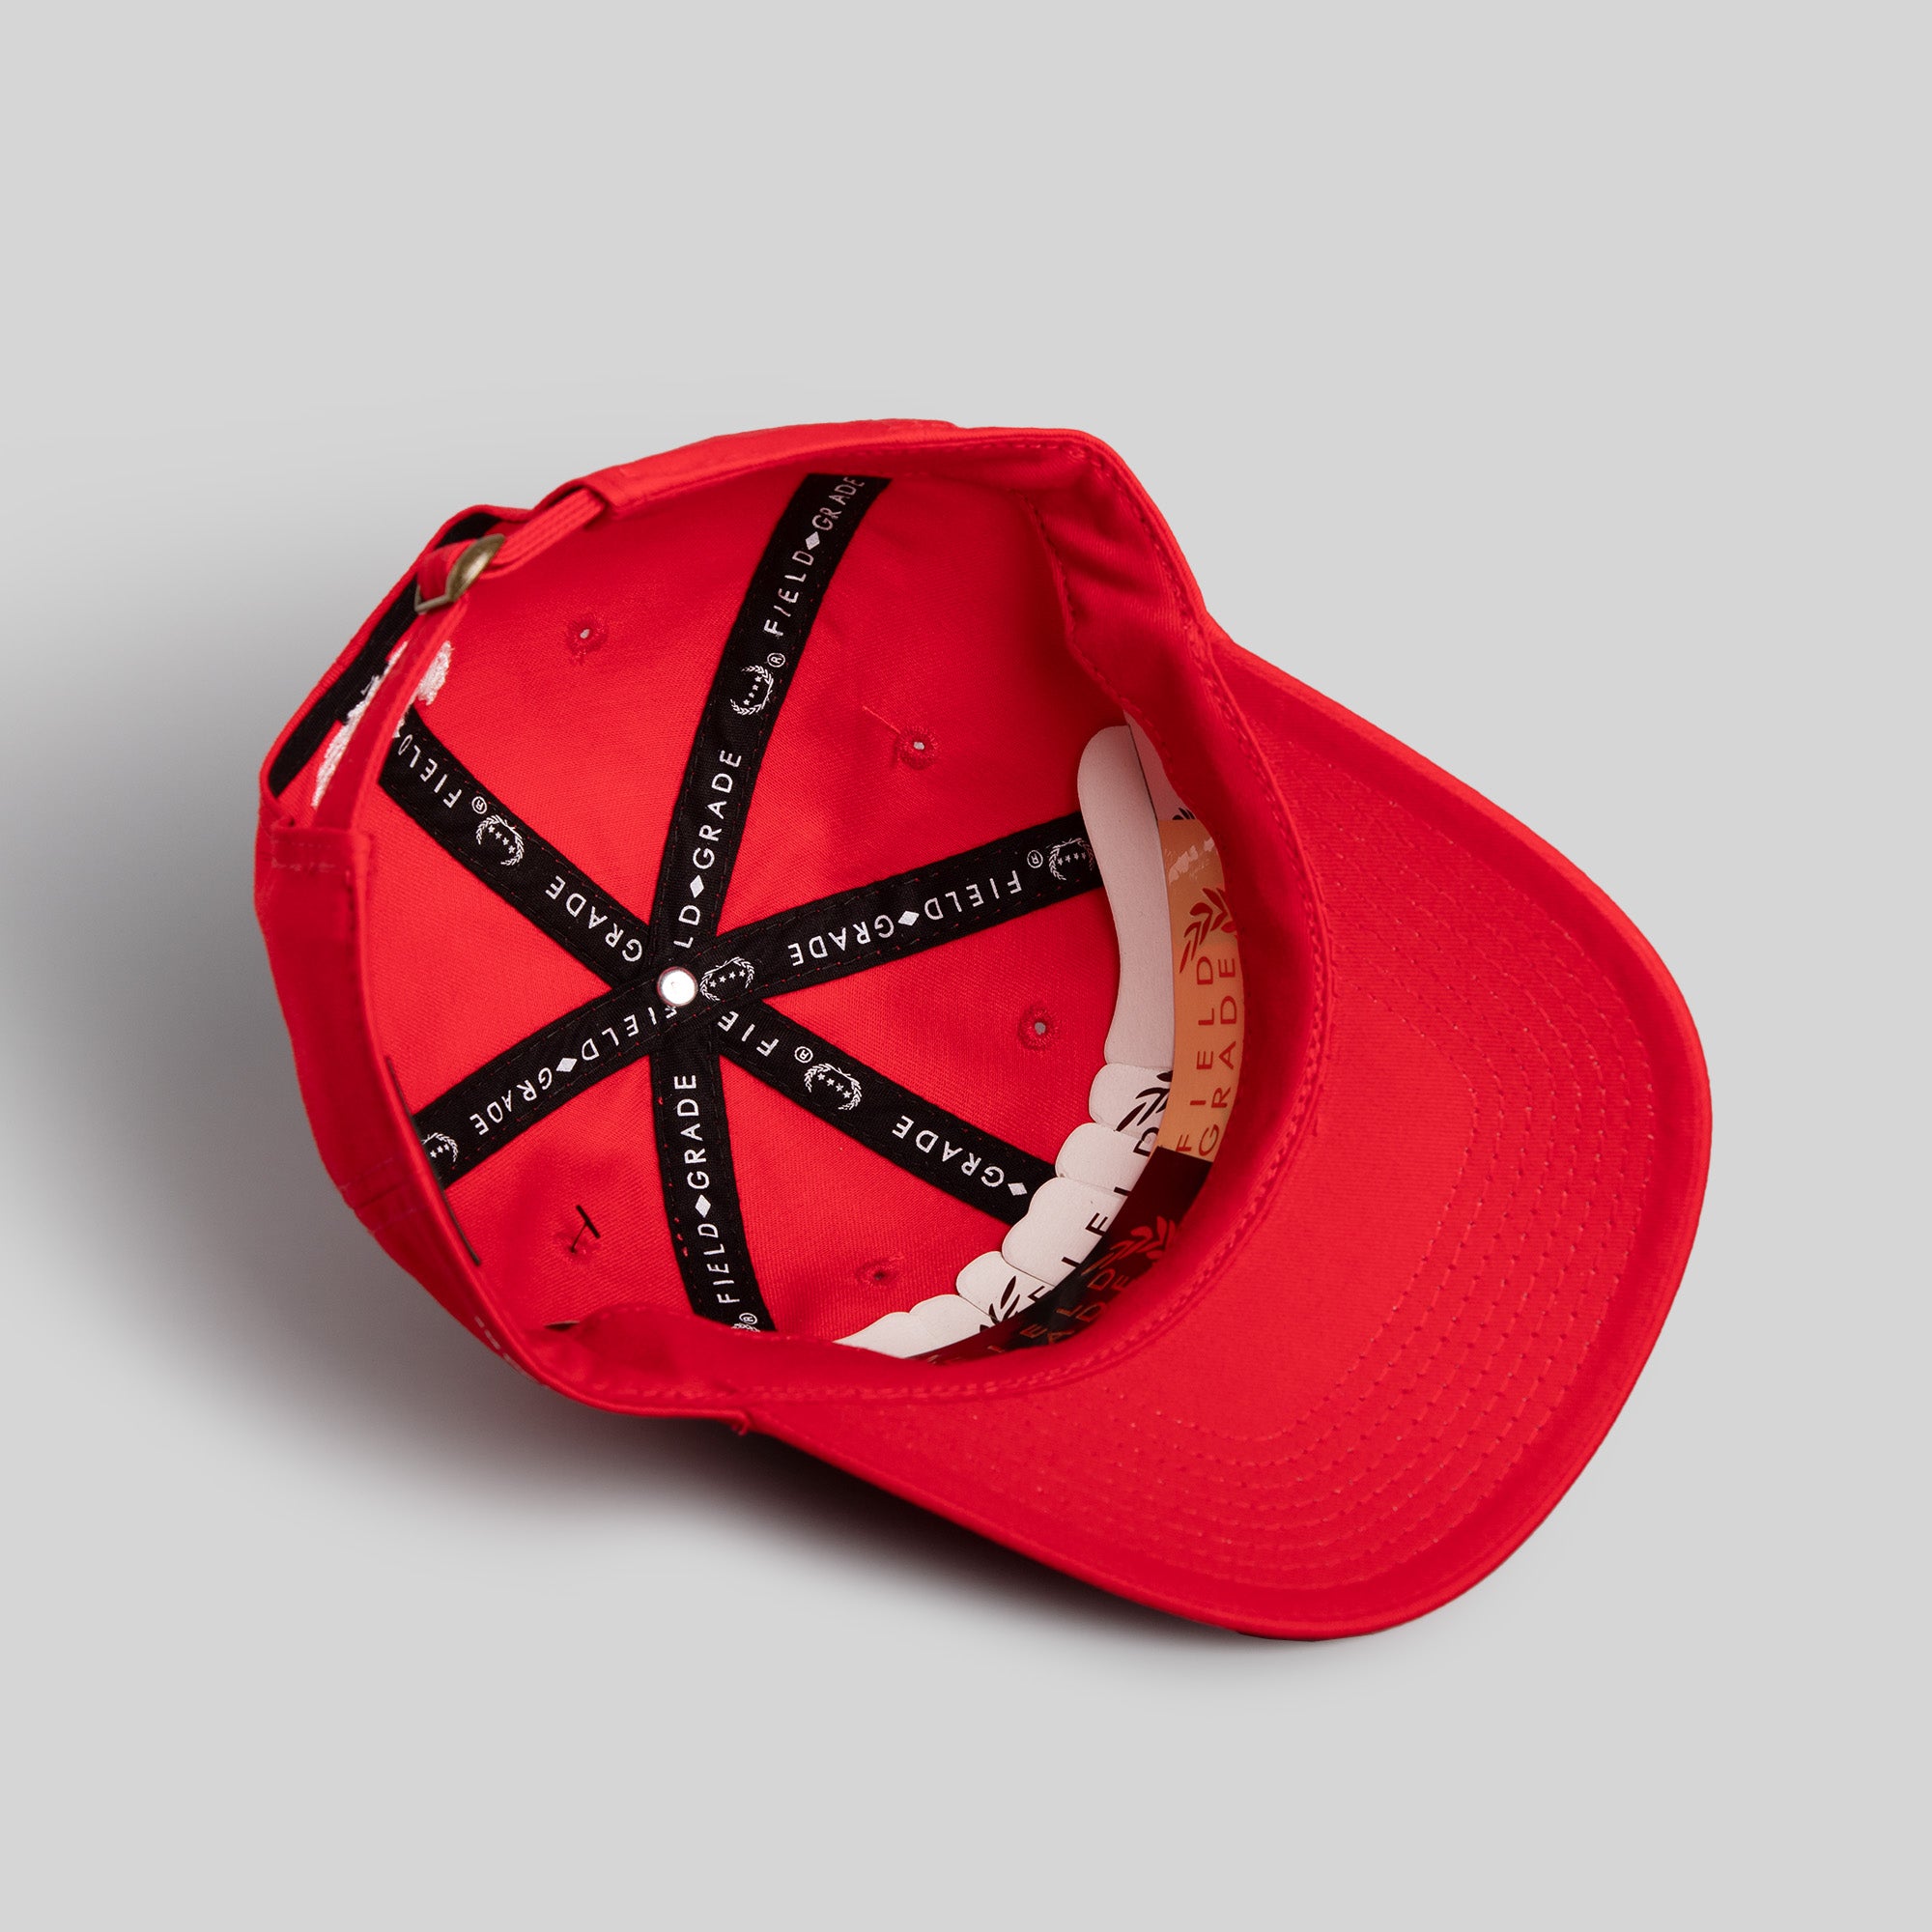 NO F*CKS GIVEN VARSITY RED RELAXED FIT HAT